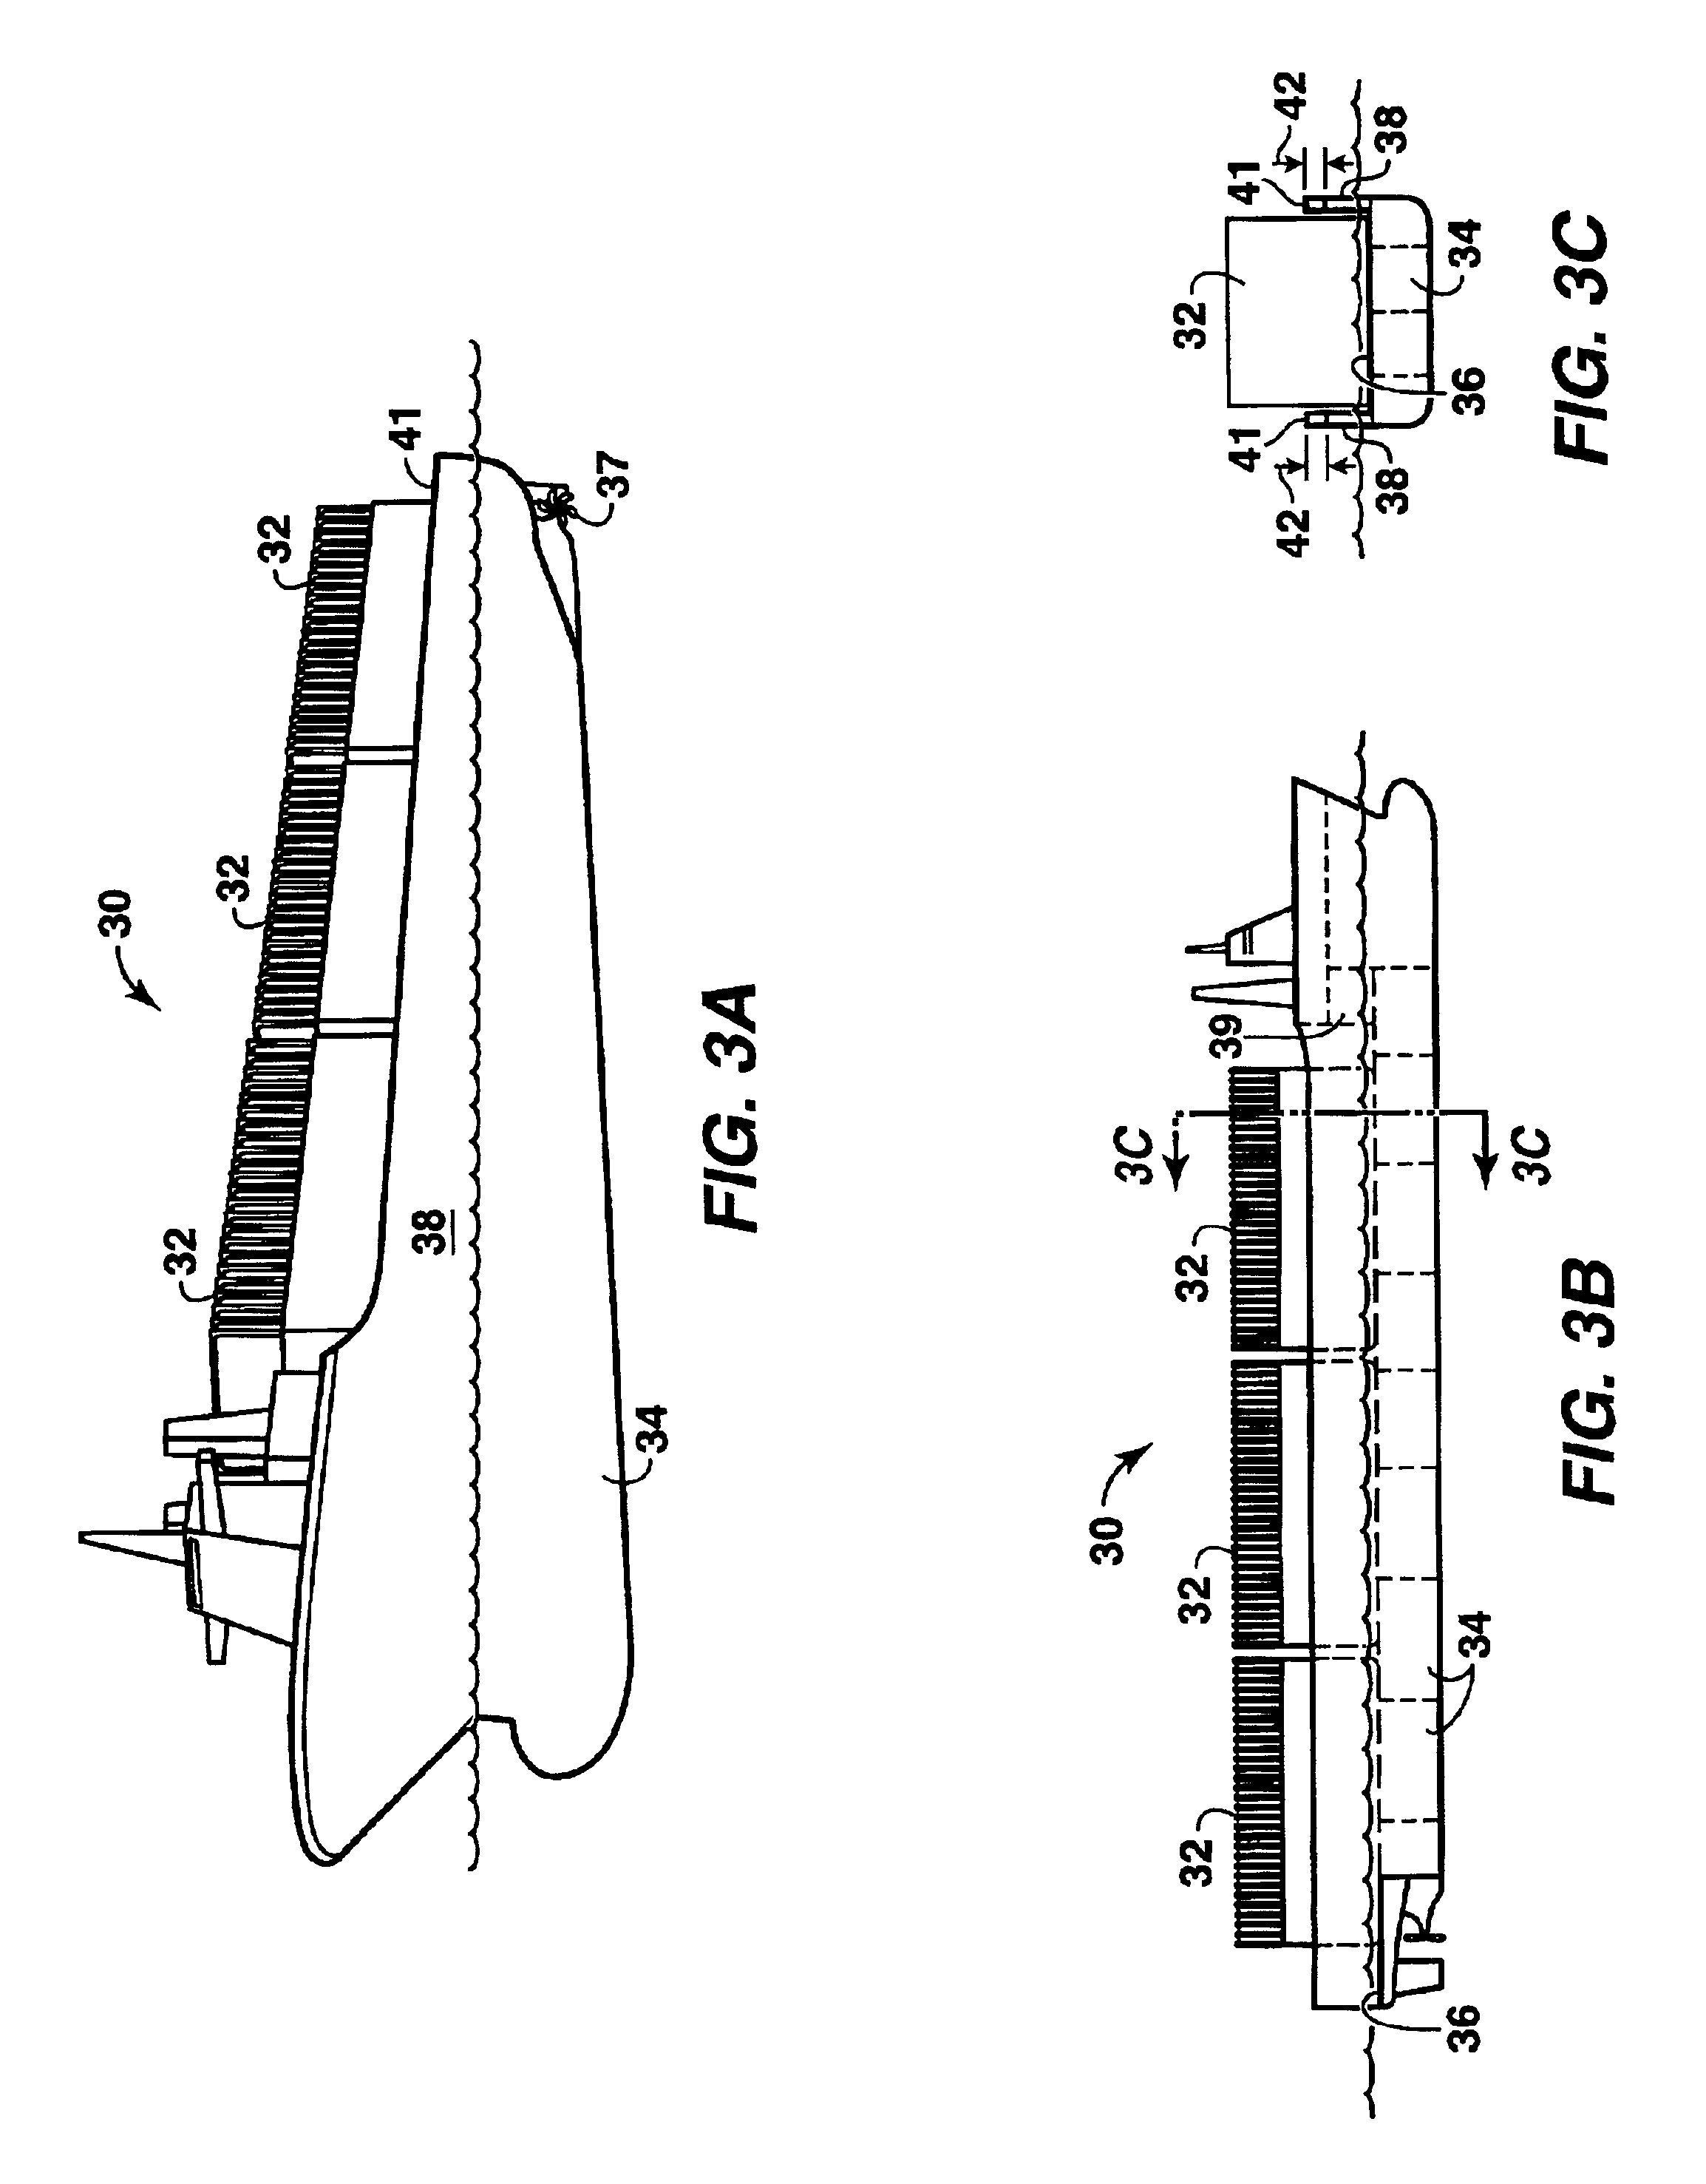 Systems and methods for transporting fluids in containers